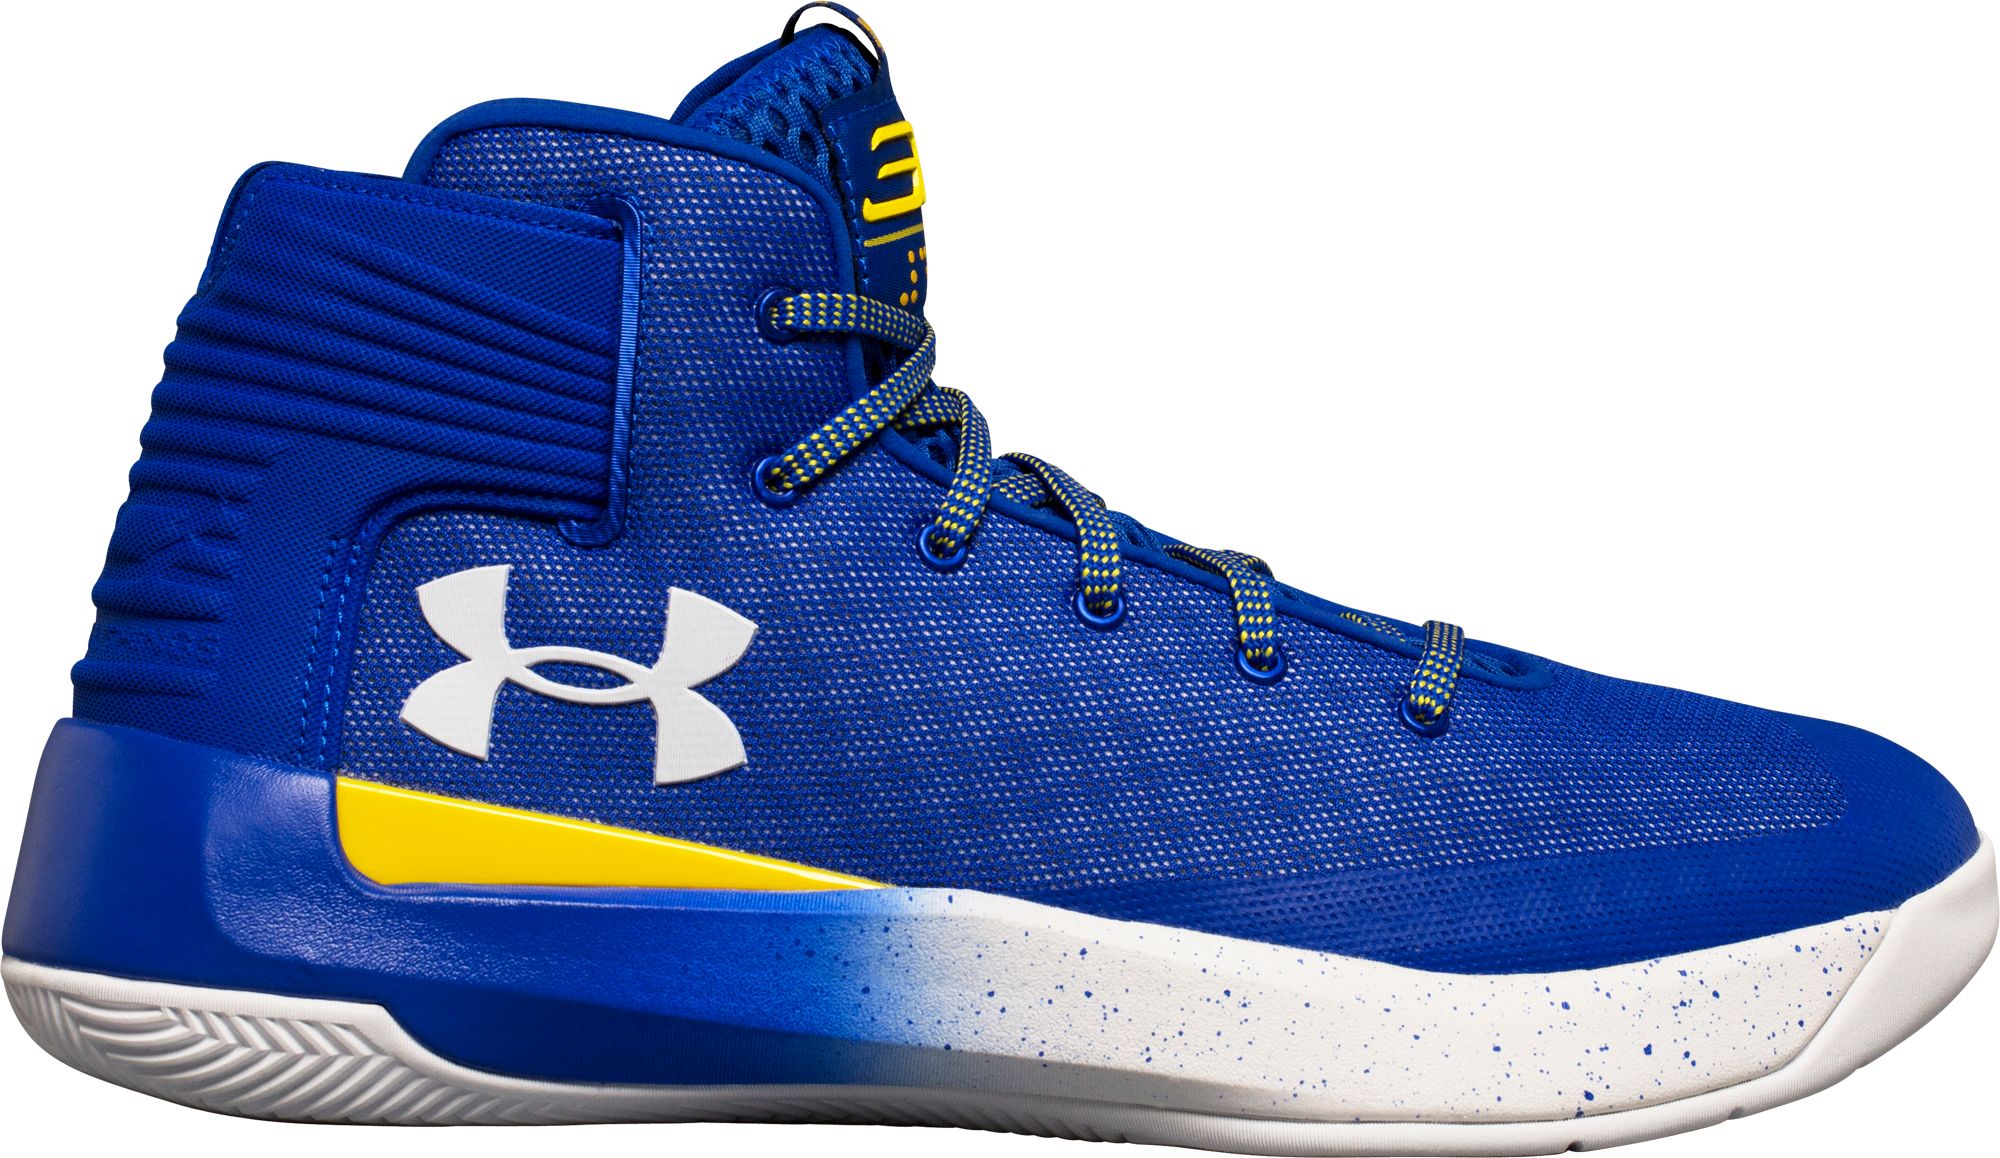 Steph Curry 2.5 Shoes Review